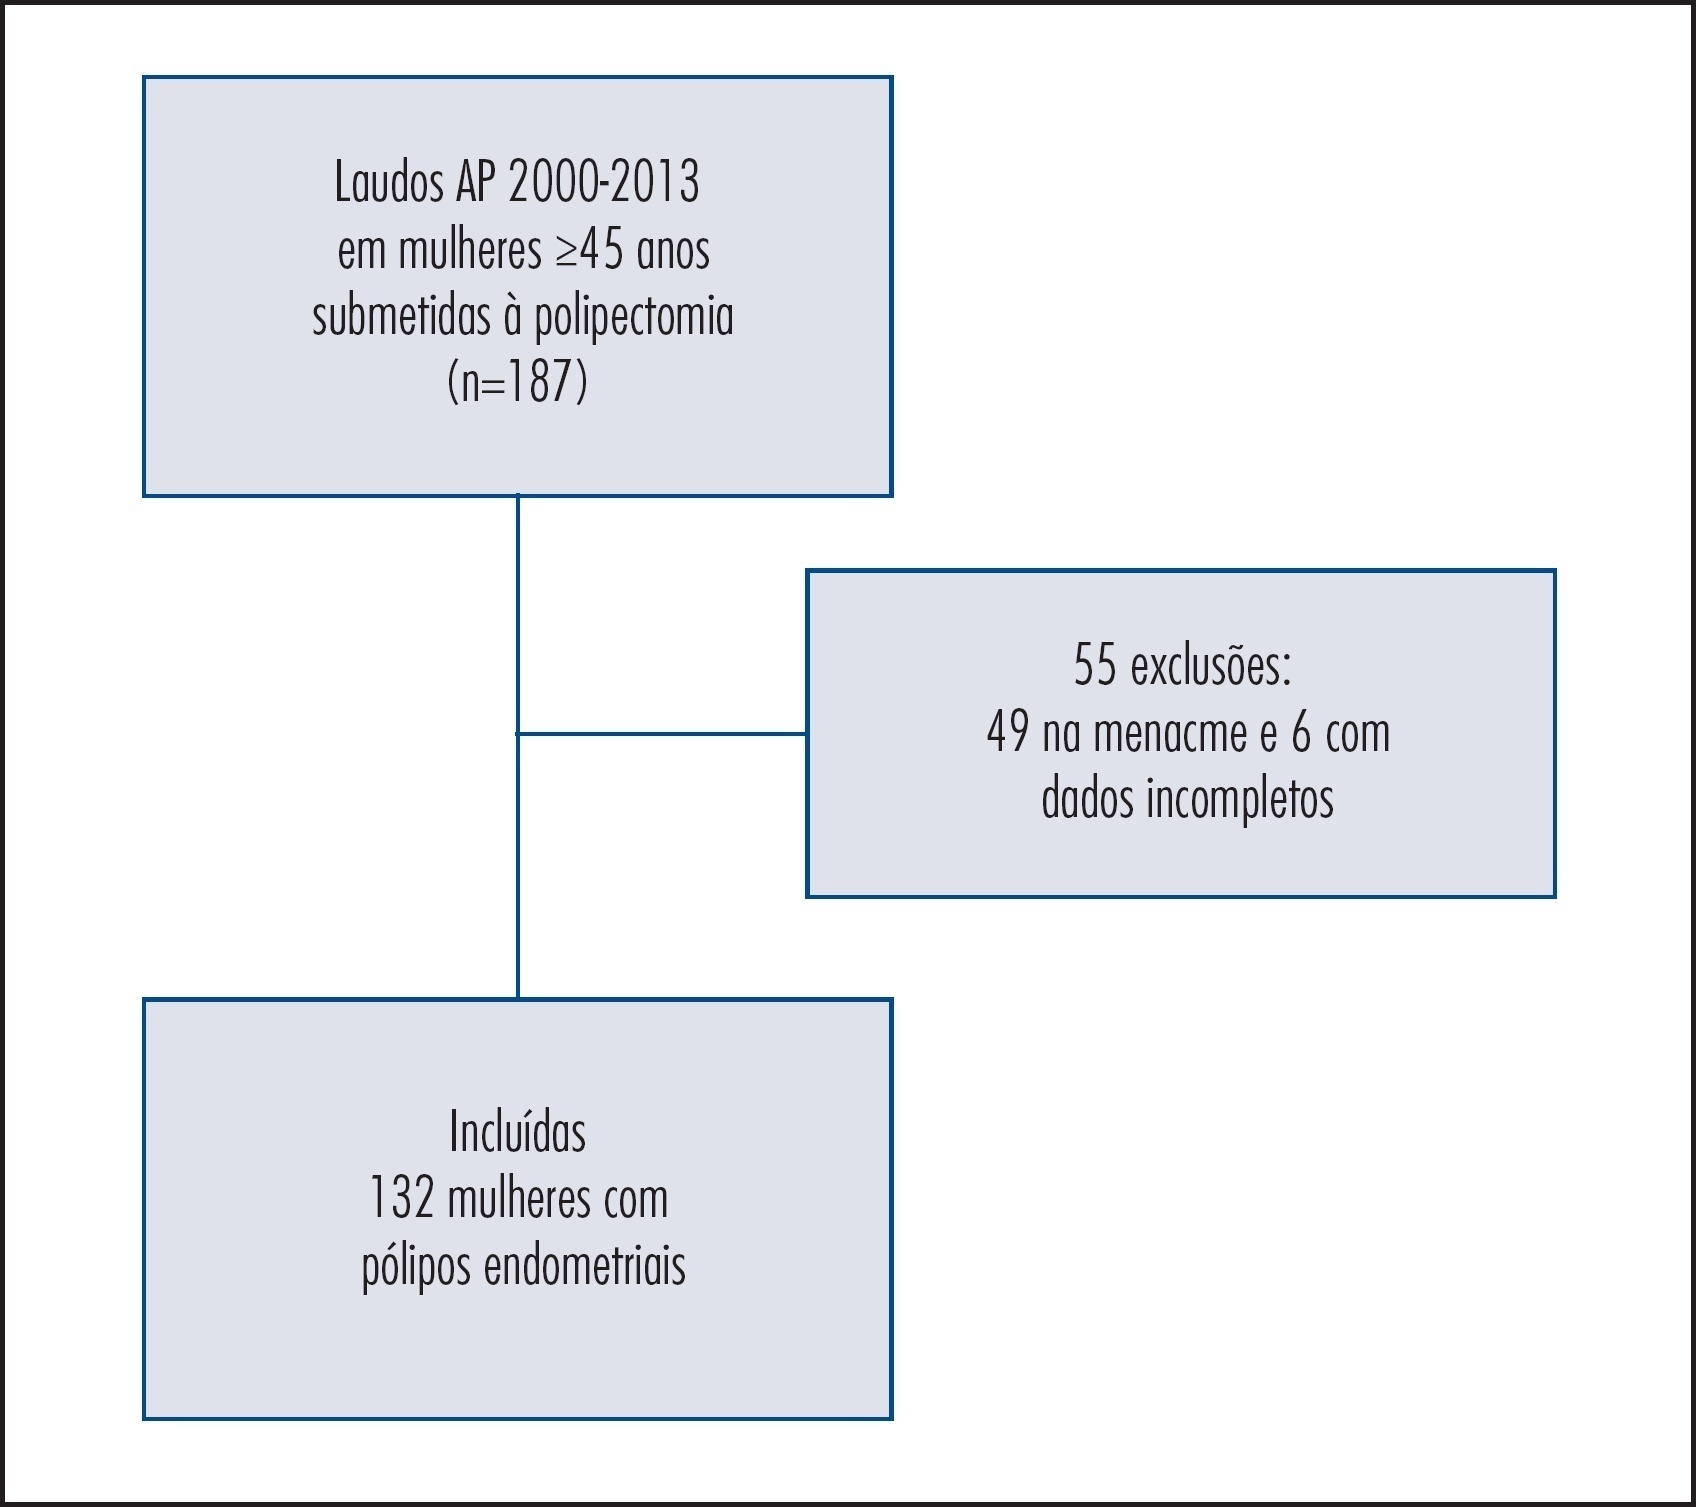 Predictive factors for occurrence of endometrial polyps in postmenopausal women